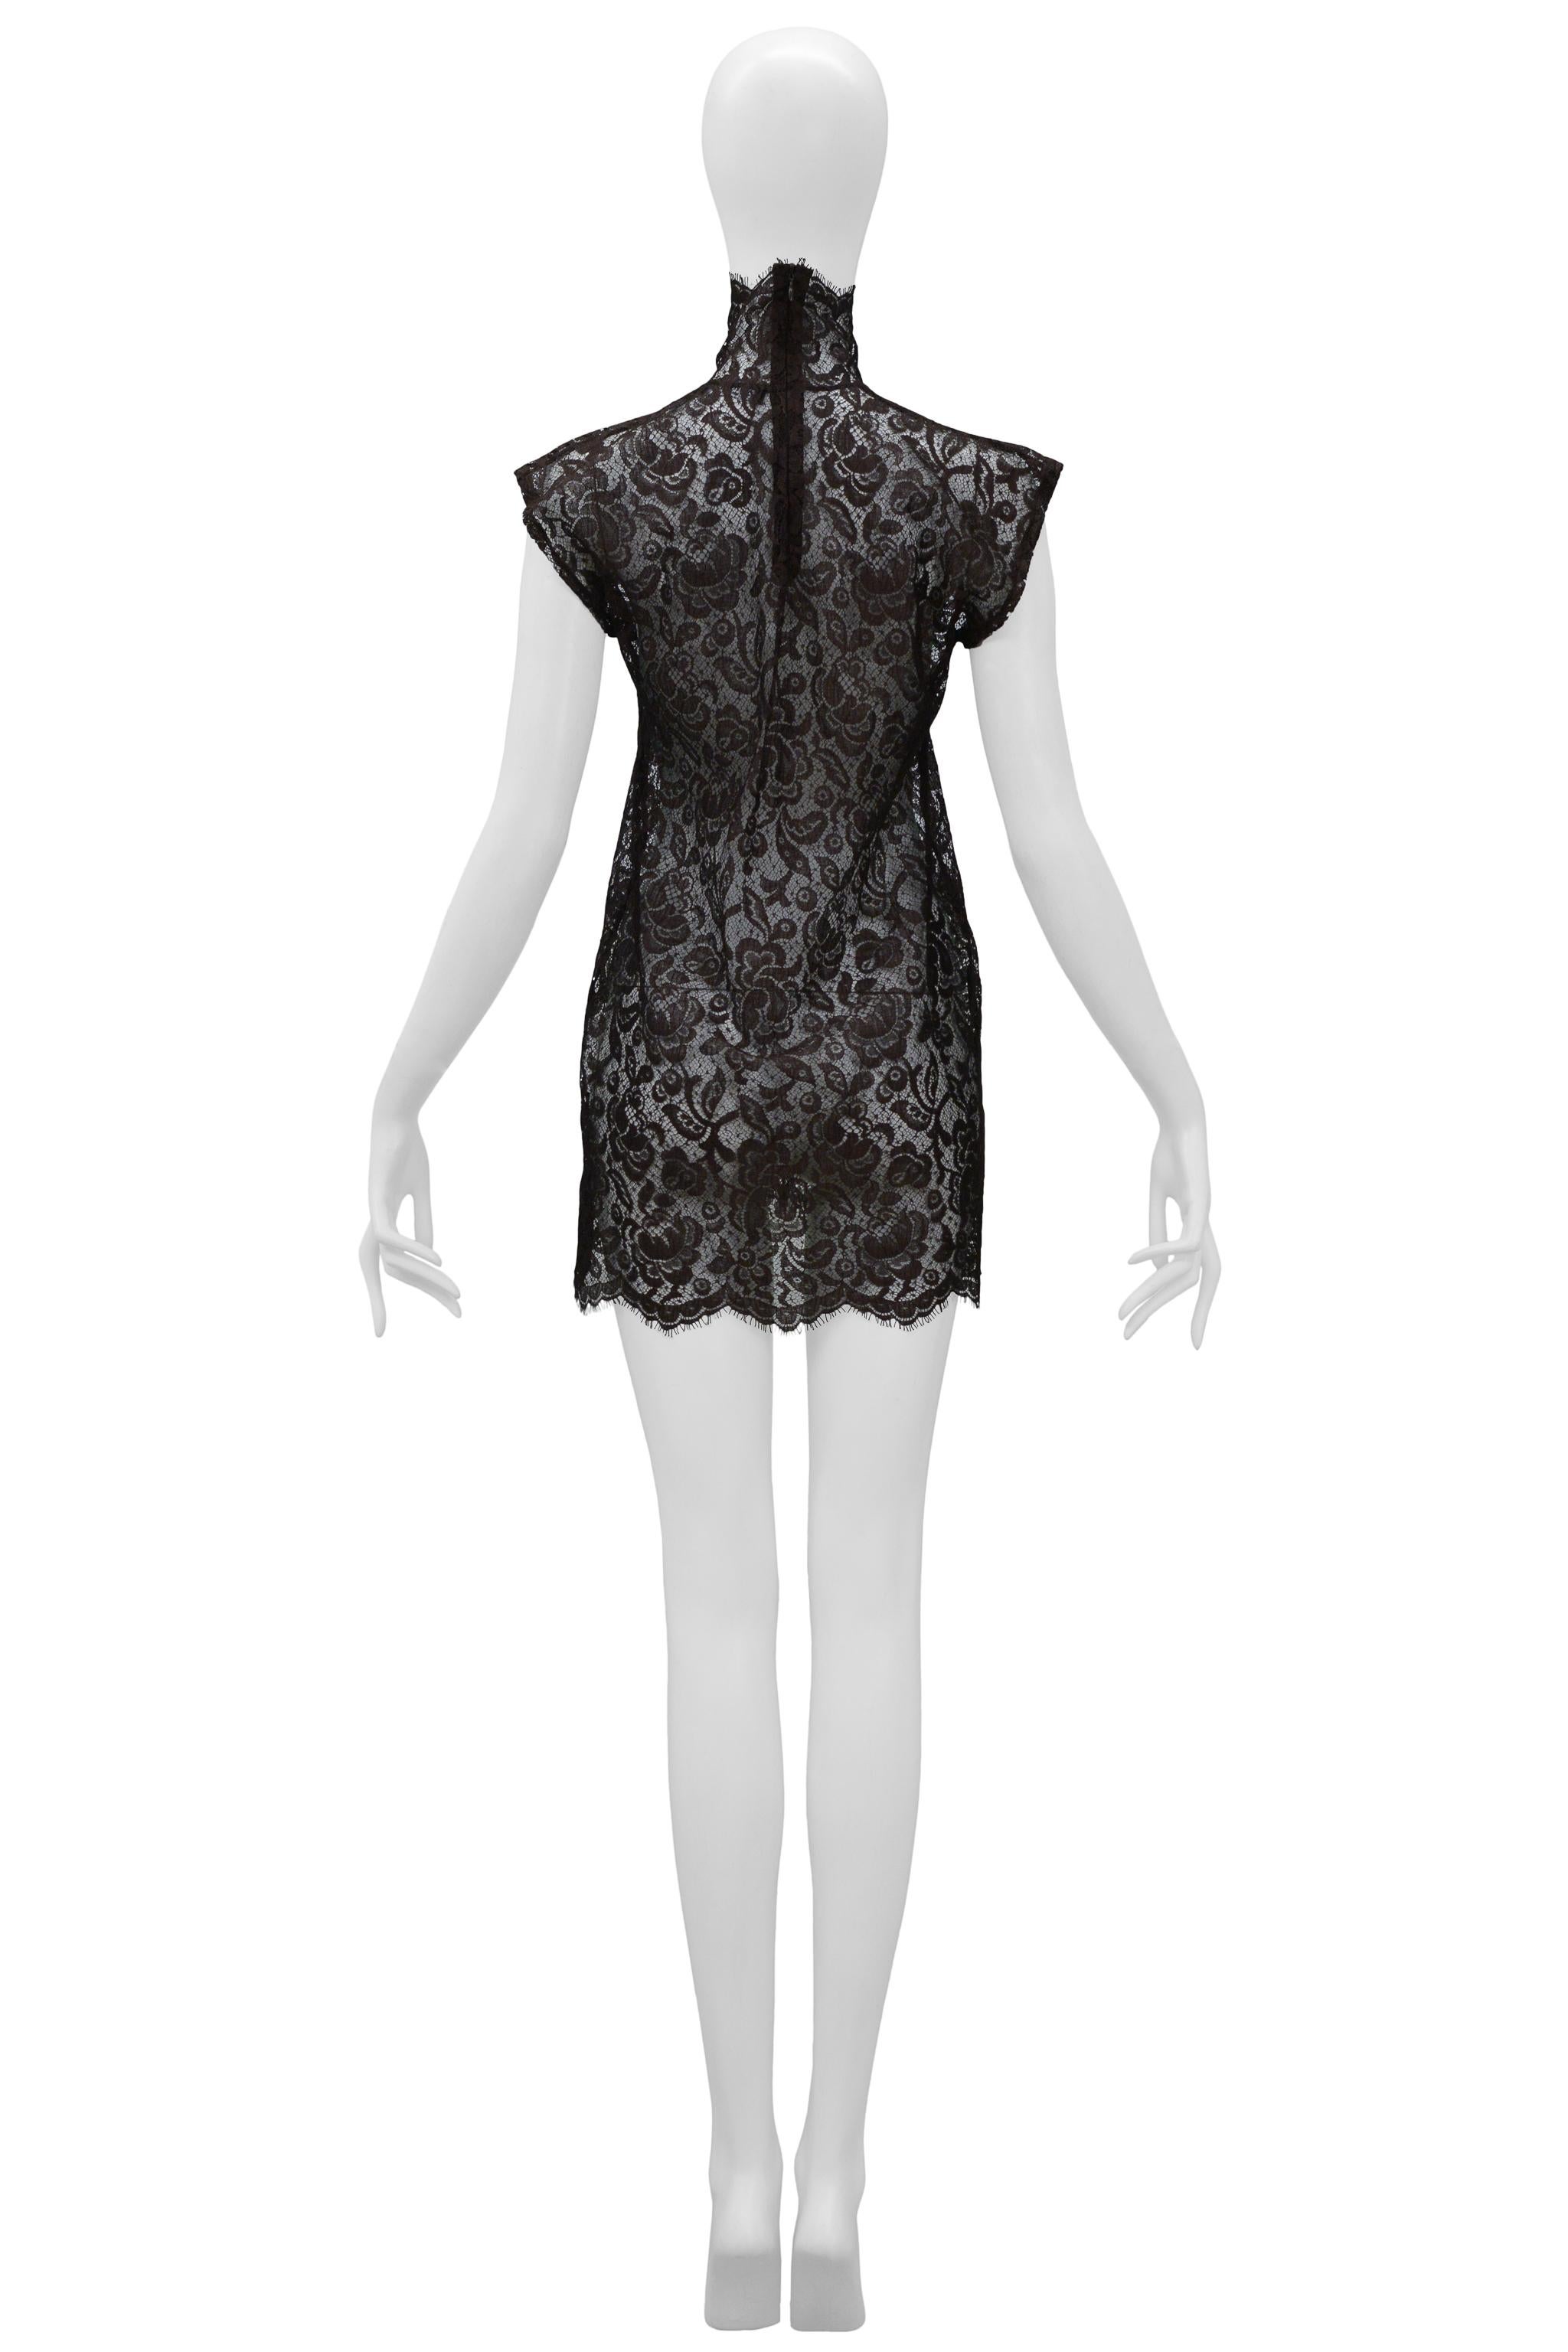 Dolce & Gabbana Brown Lace Mini Dress with High Neck 2001  2